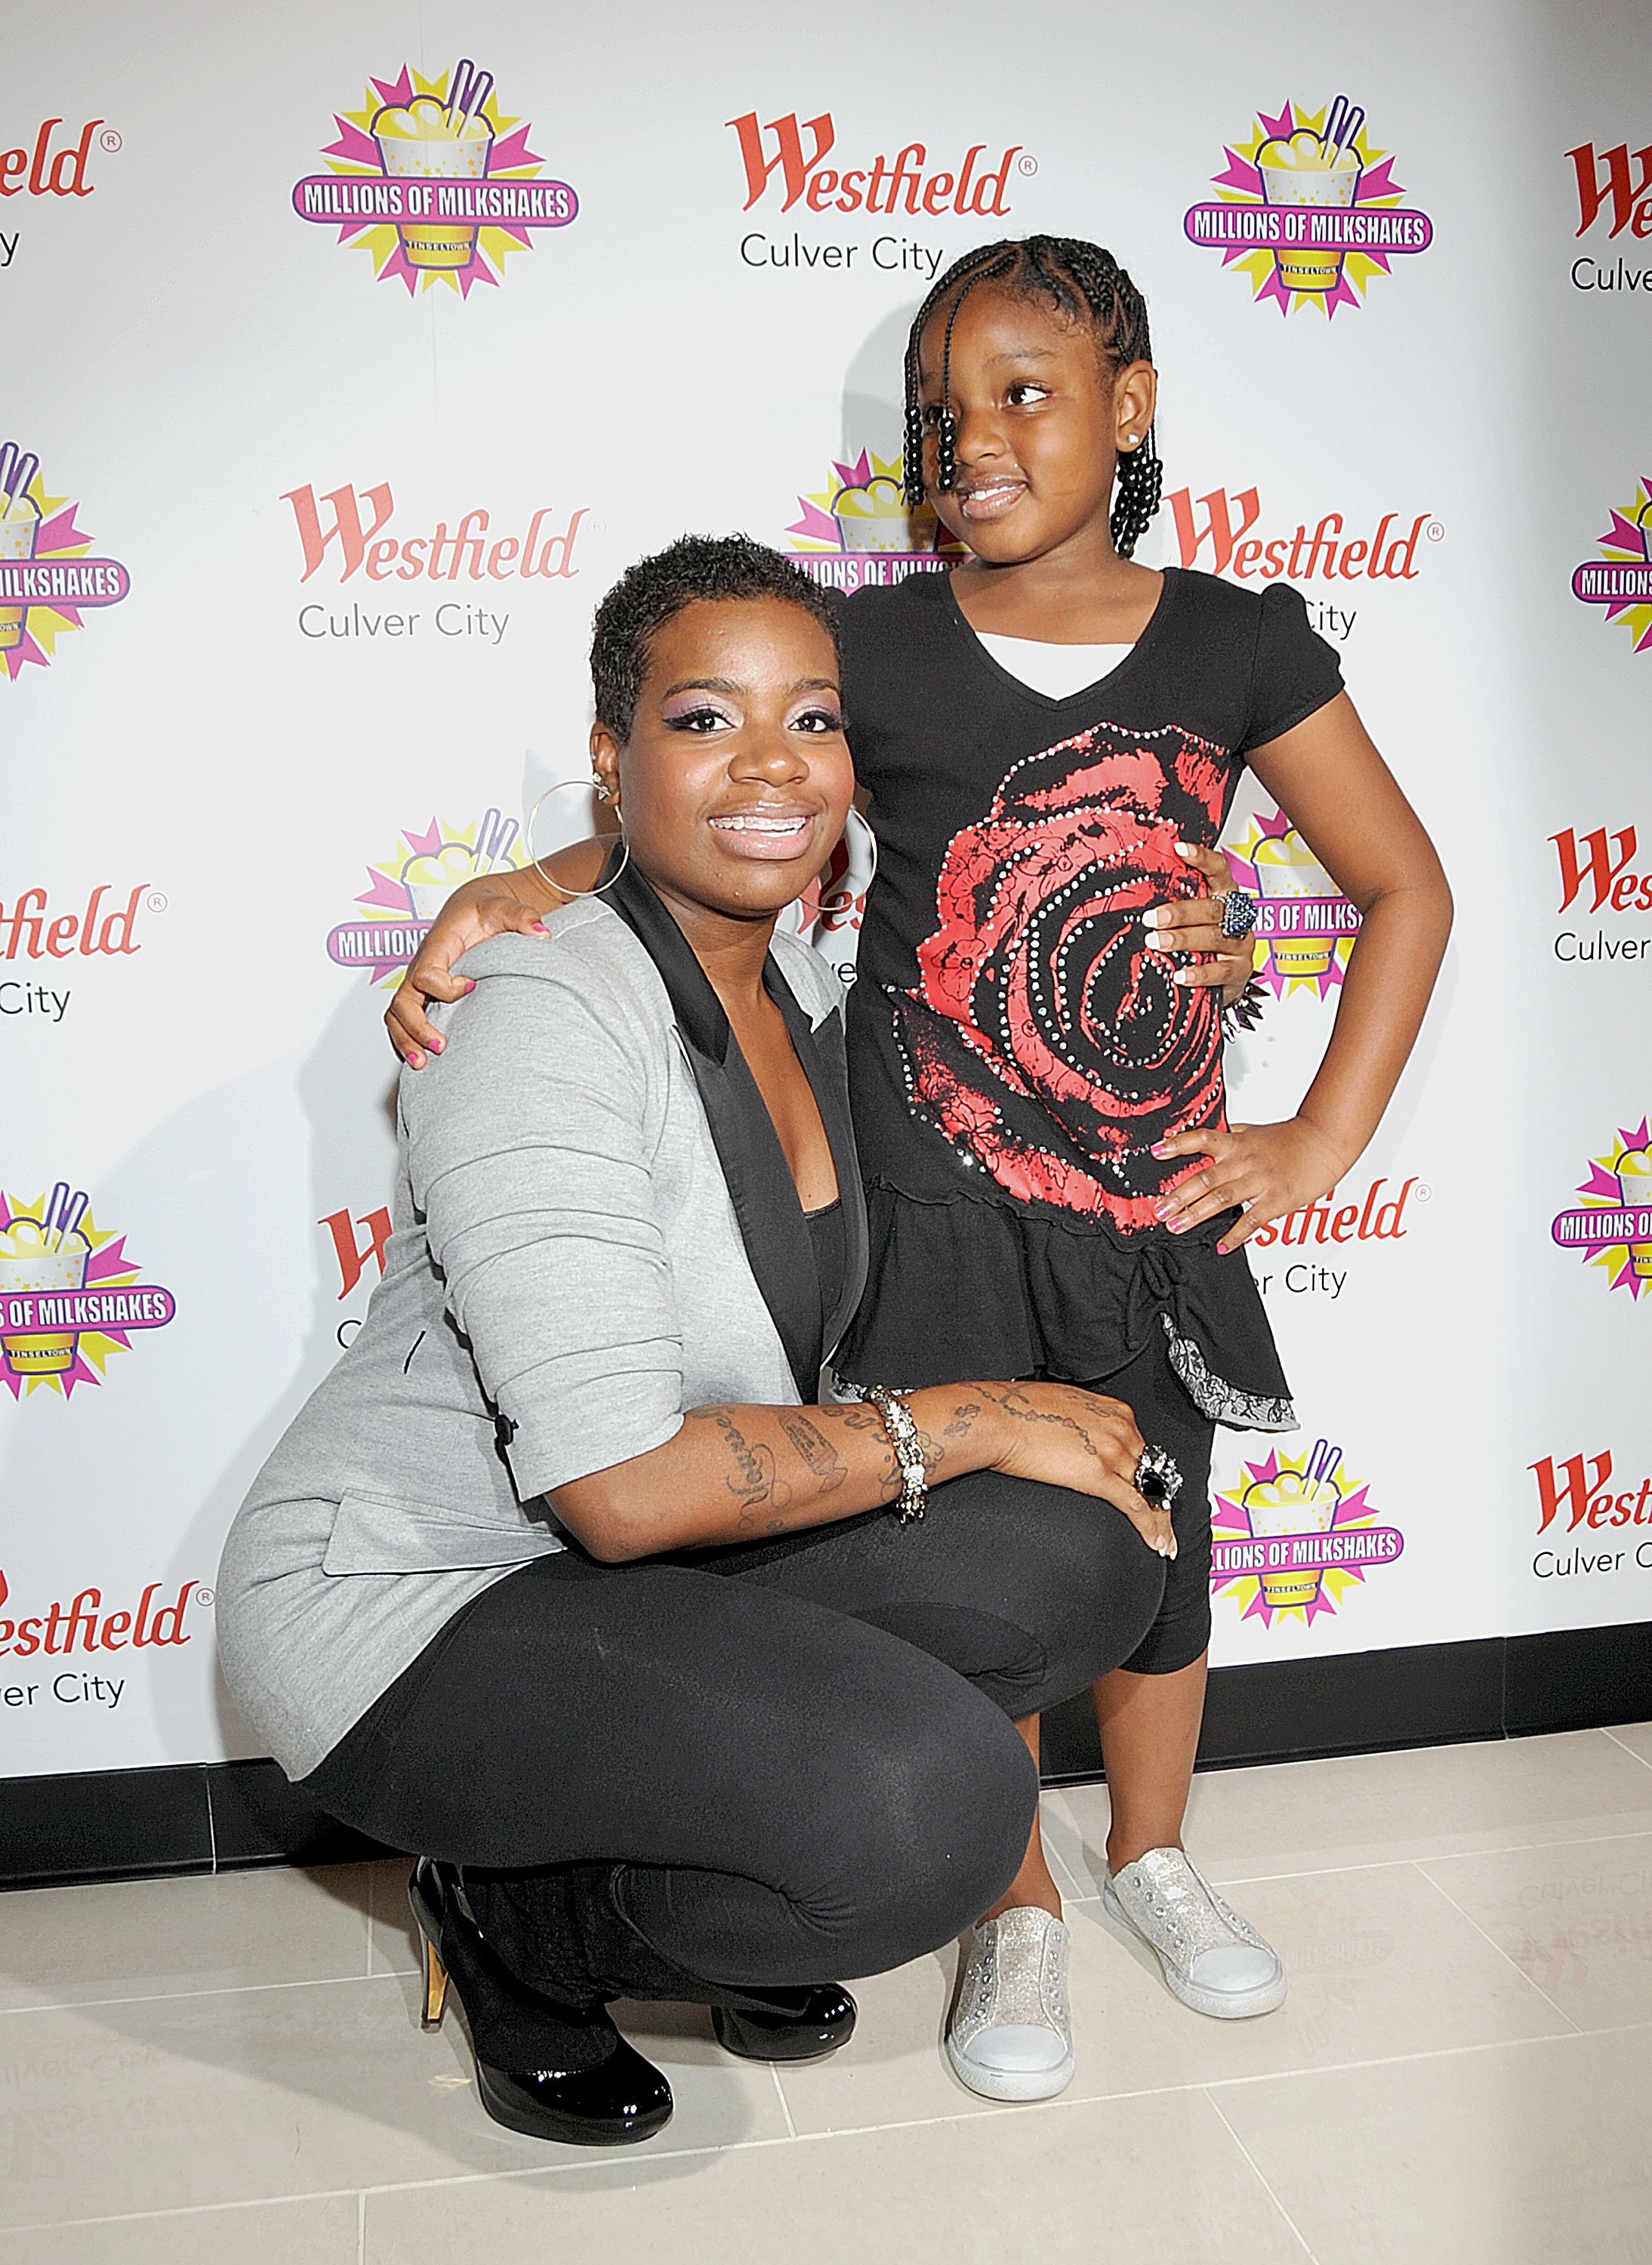 Fantasia and her daughter, Zion Barrino at Millions of Milkshakes on November 24, 2010 in Culver City, California. | Source: Getty Images